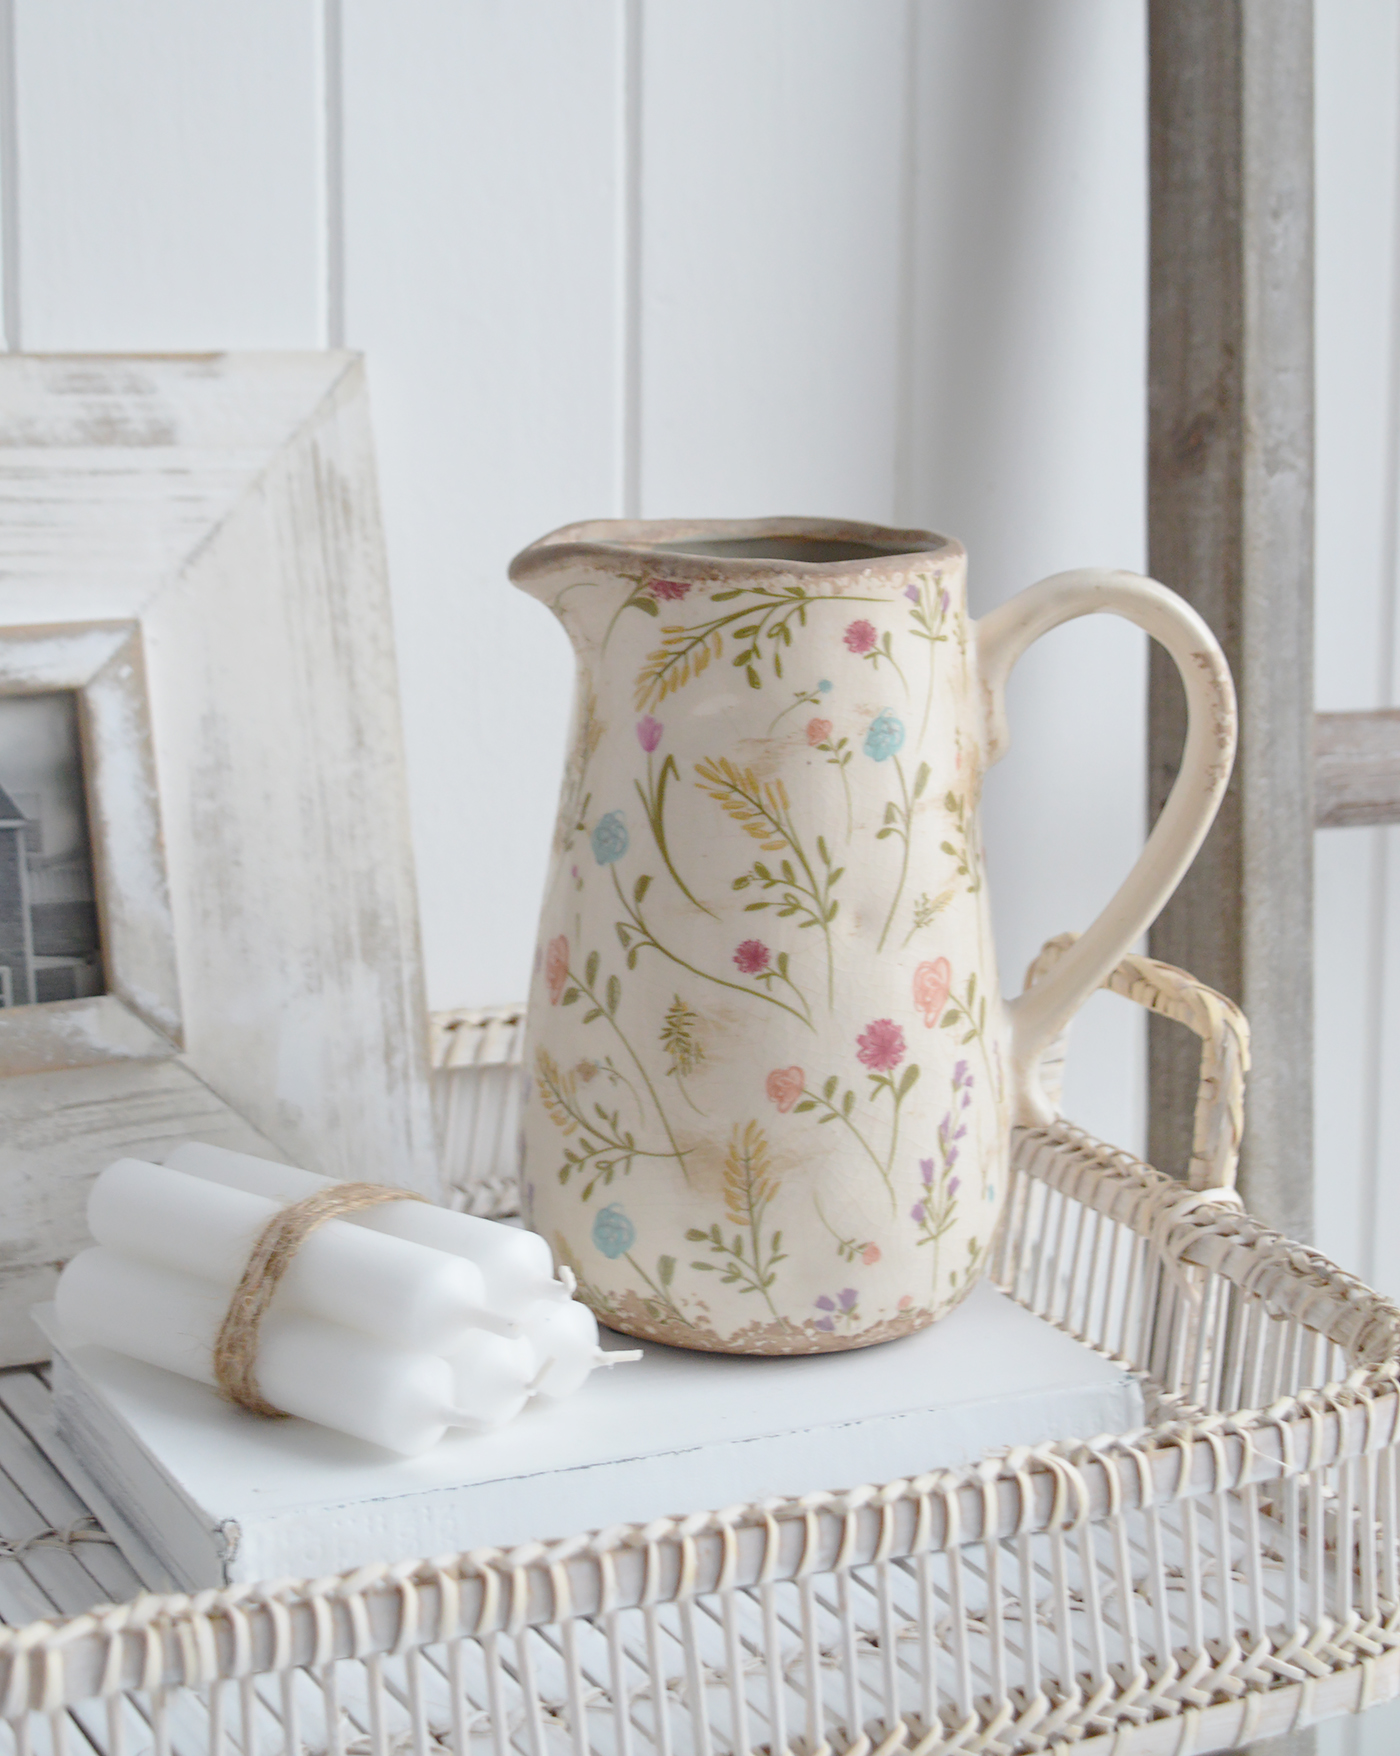 The marston range of floral vintaged ceramic, vase, jug and pots to style New England homes